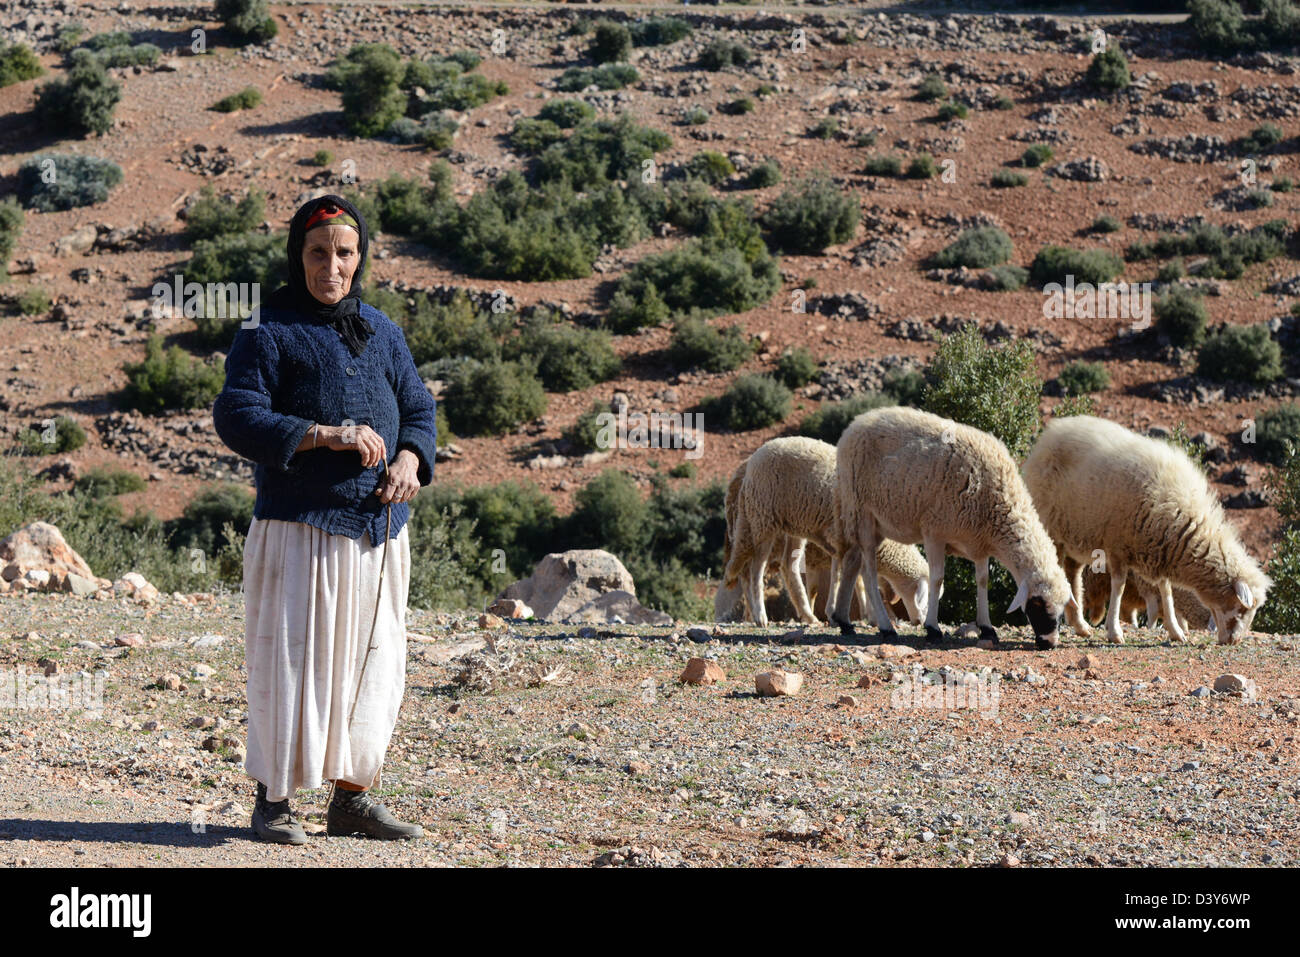 Berber woman in Morocco with her sheep. Stock Photo